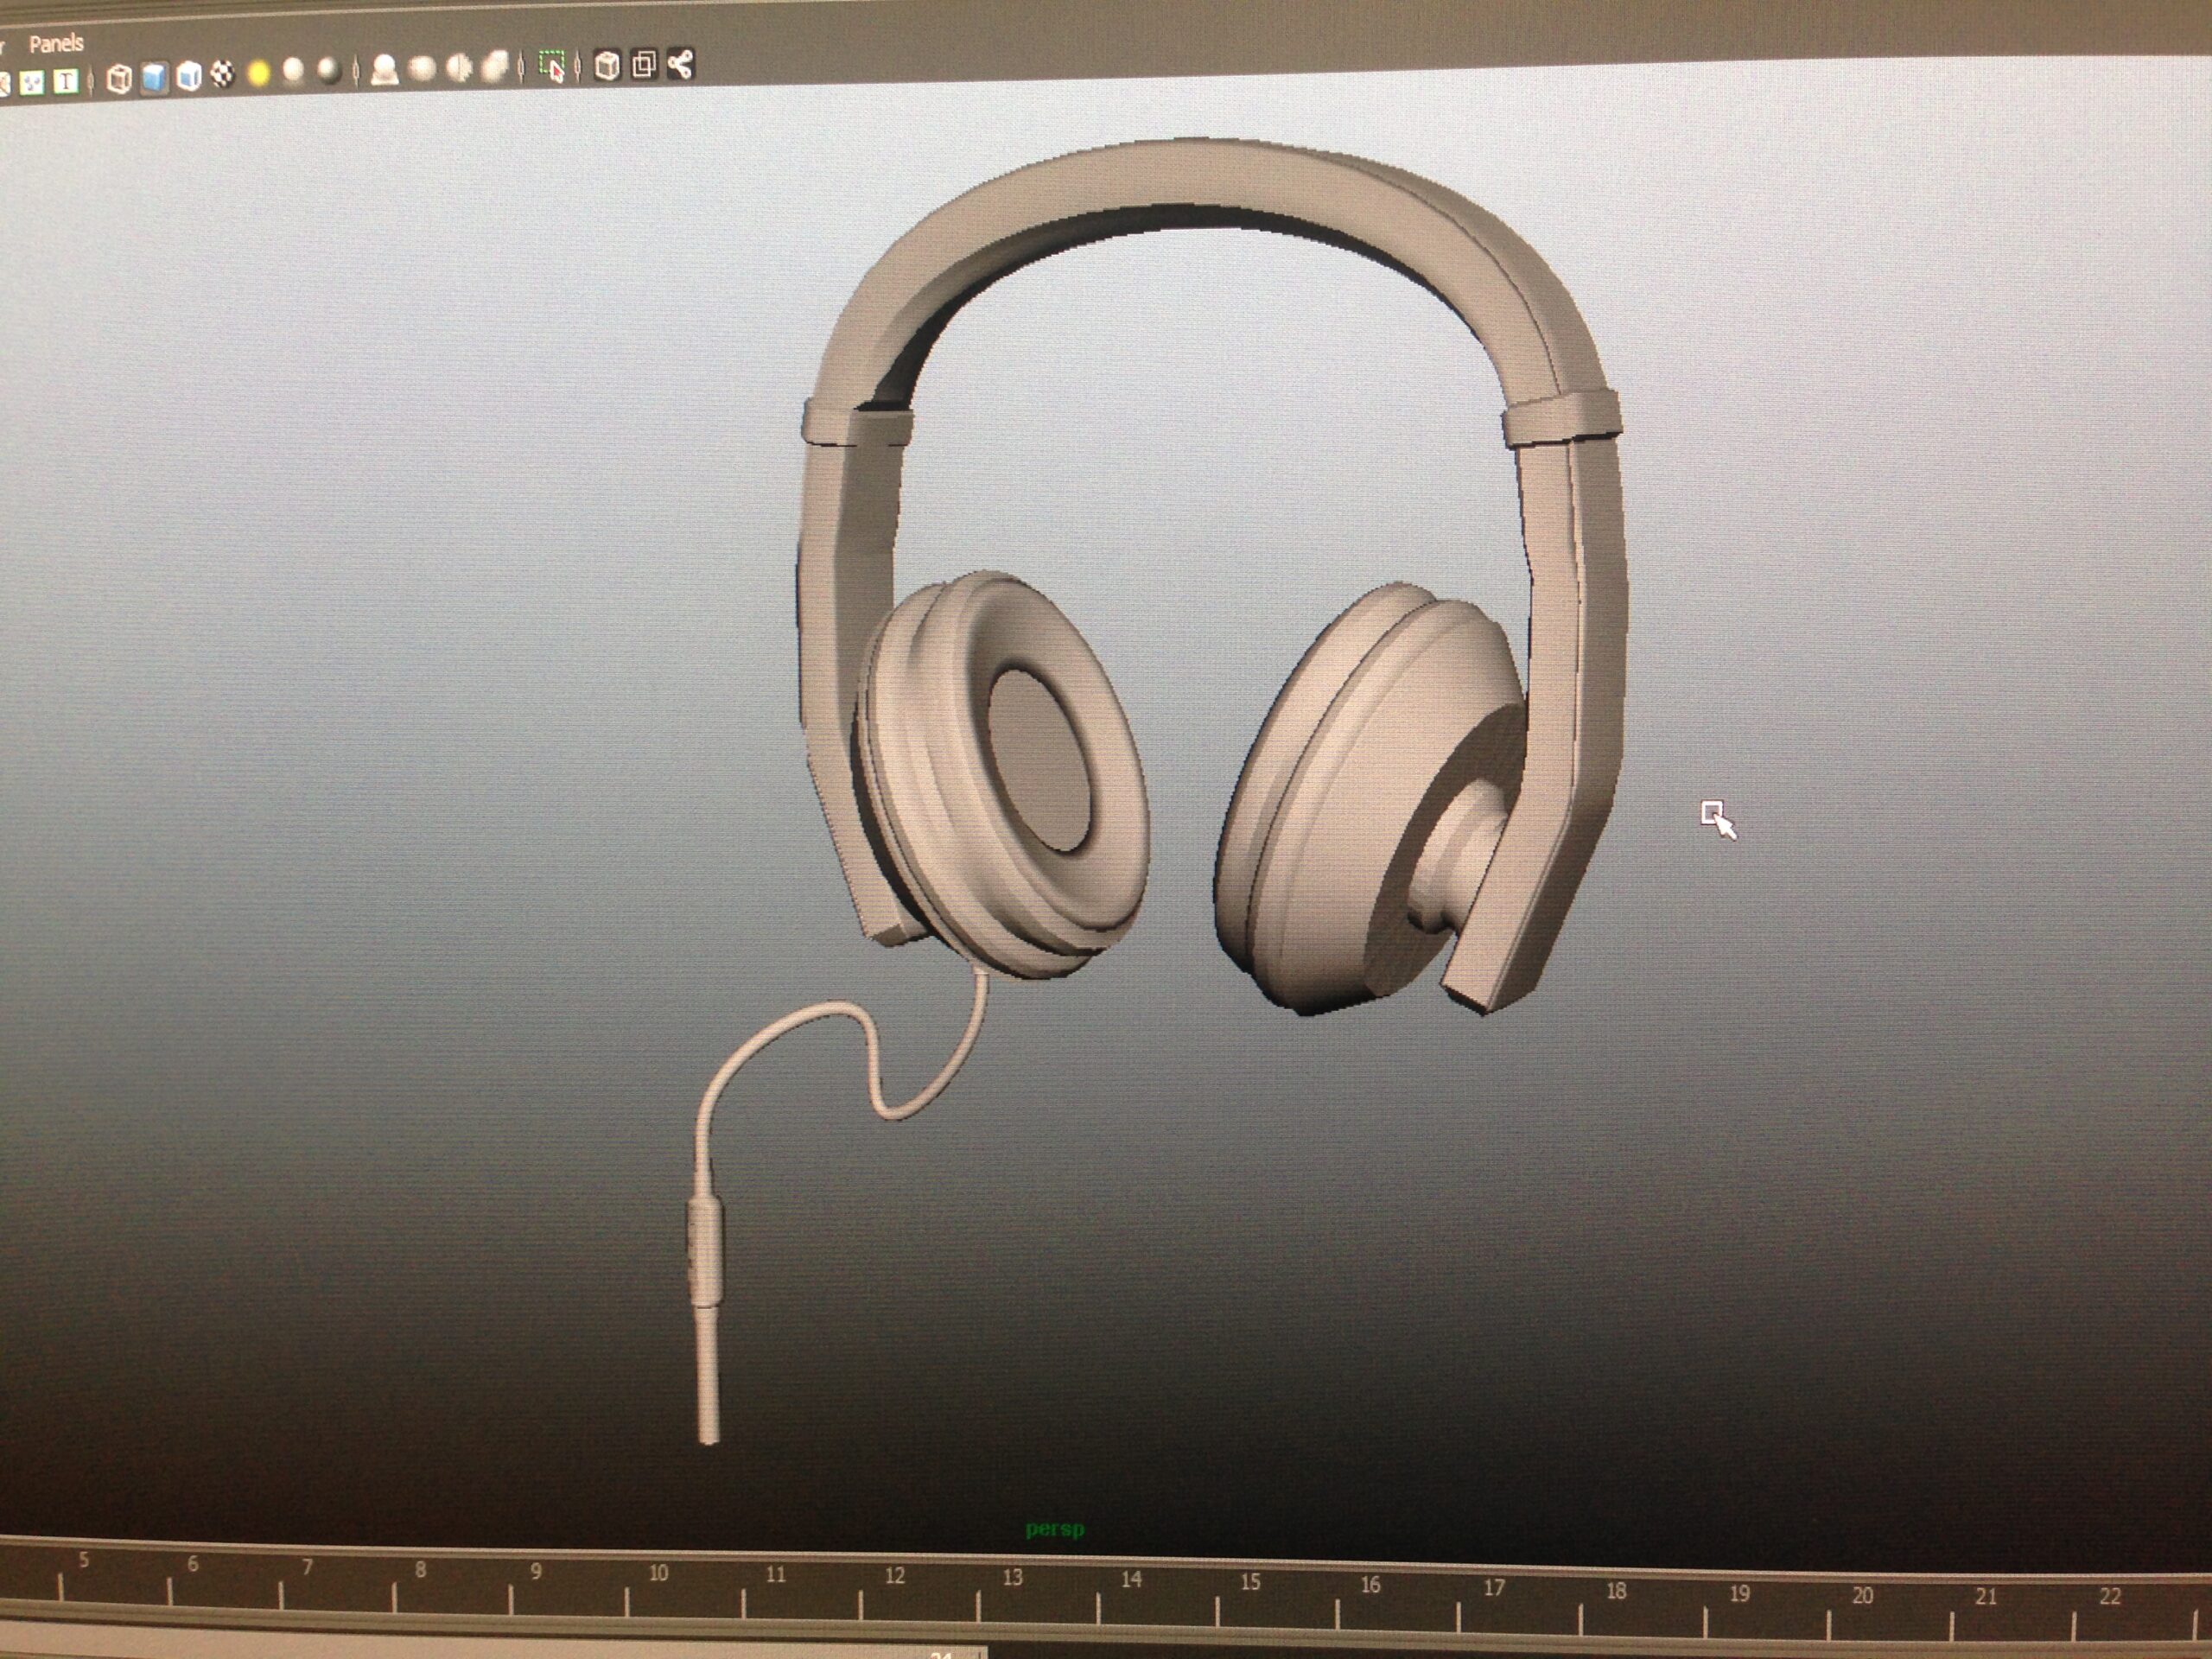 An asset created by Michael in the software Maya during his introductionary time at Champlain.